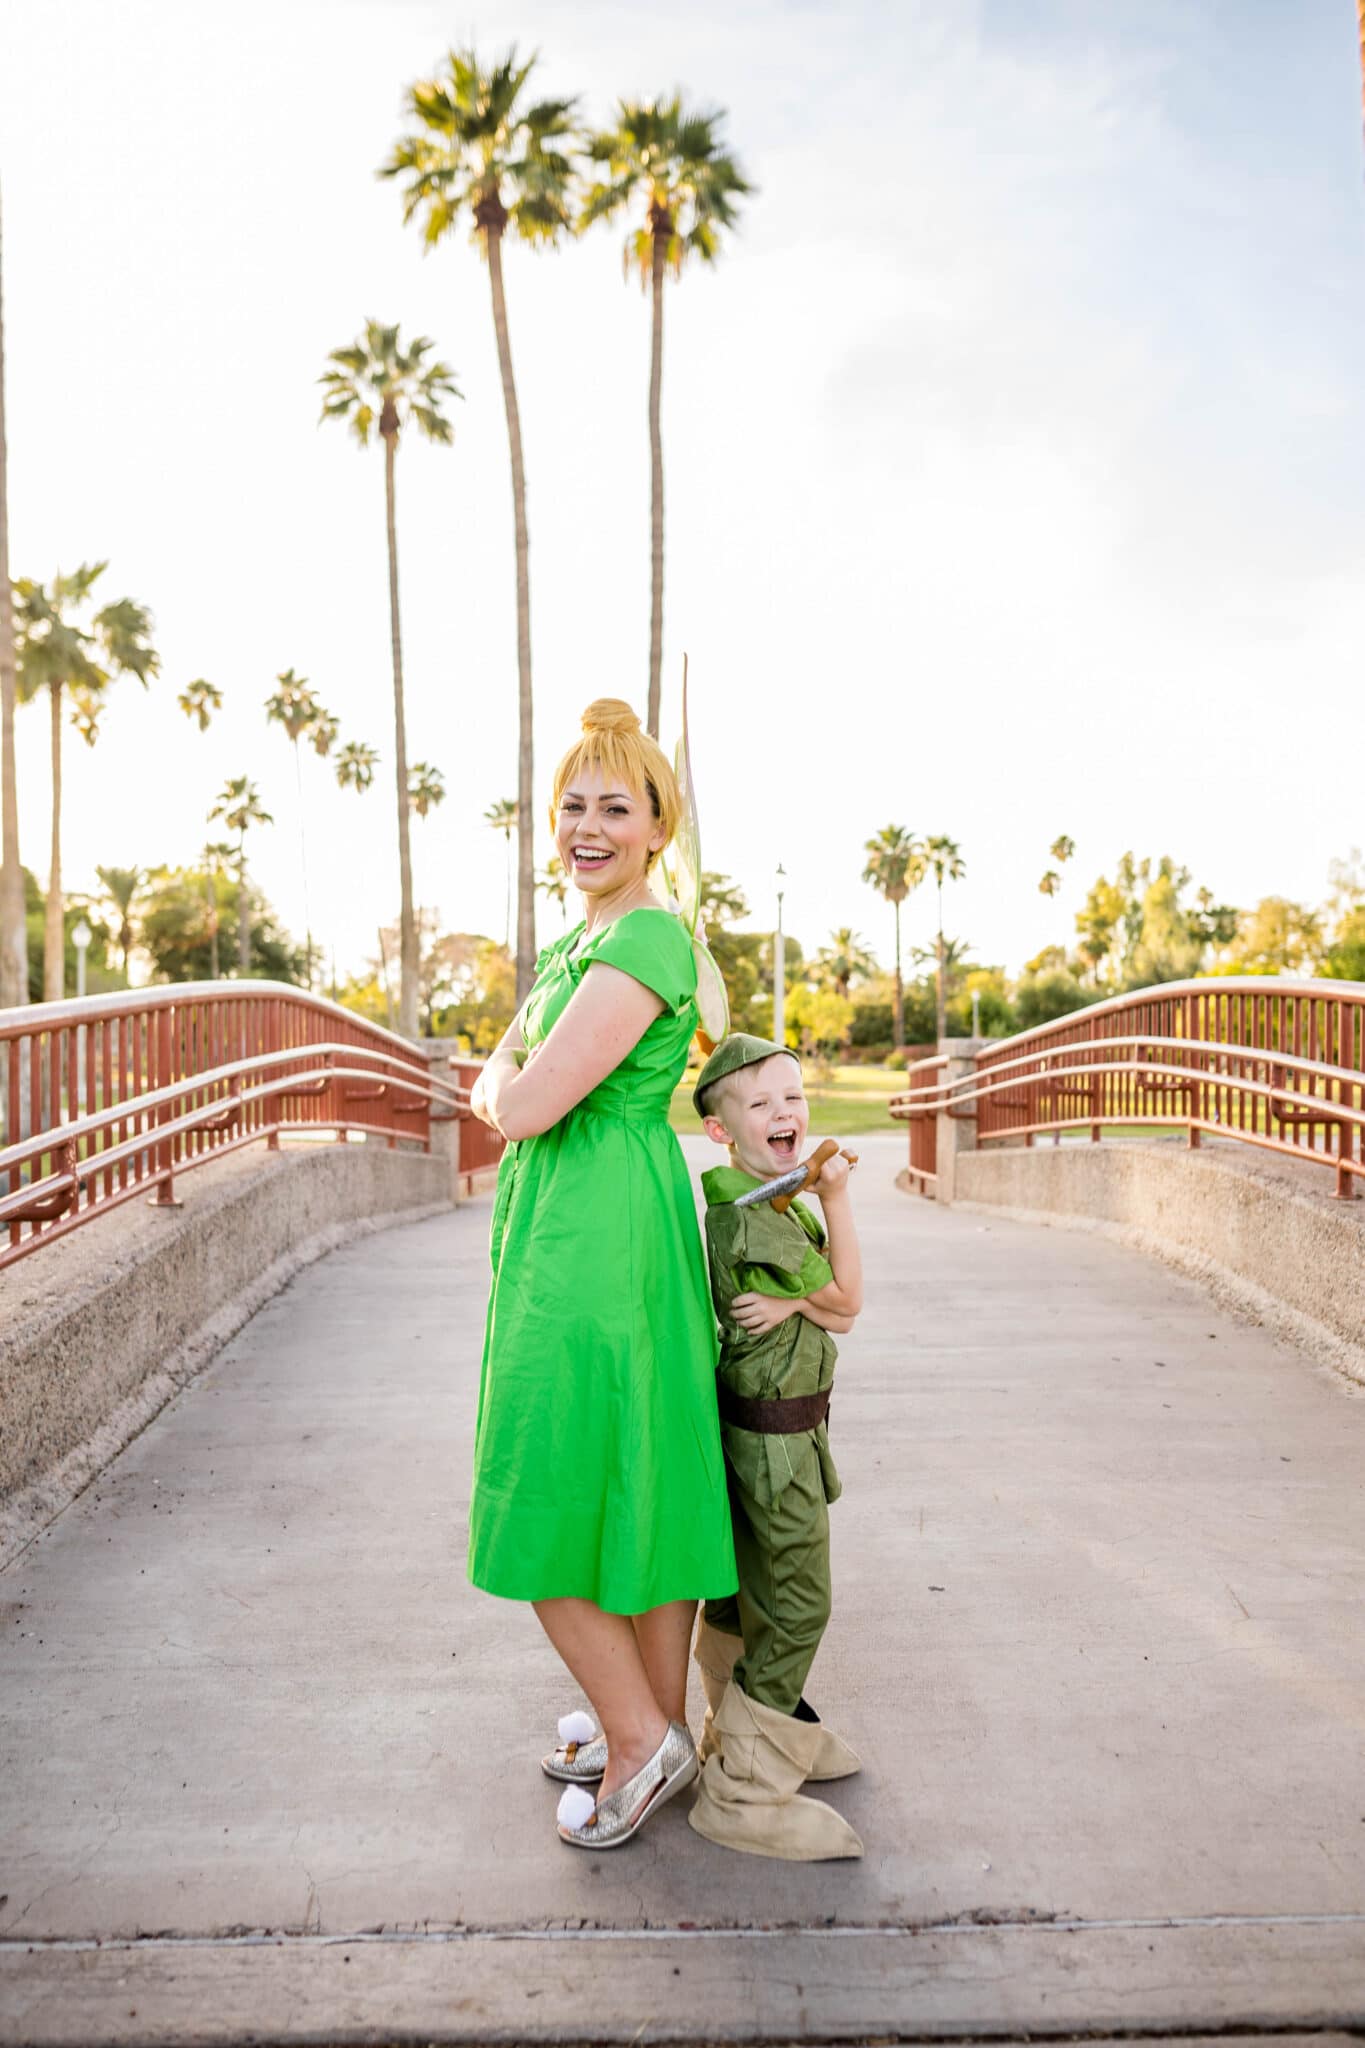 Mom dressed as Tinkerbell and Peter Pan Costume on her son. 